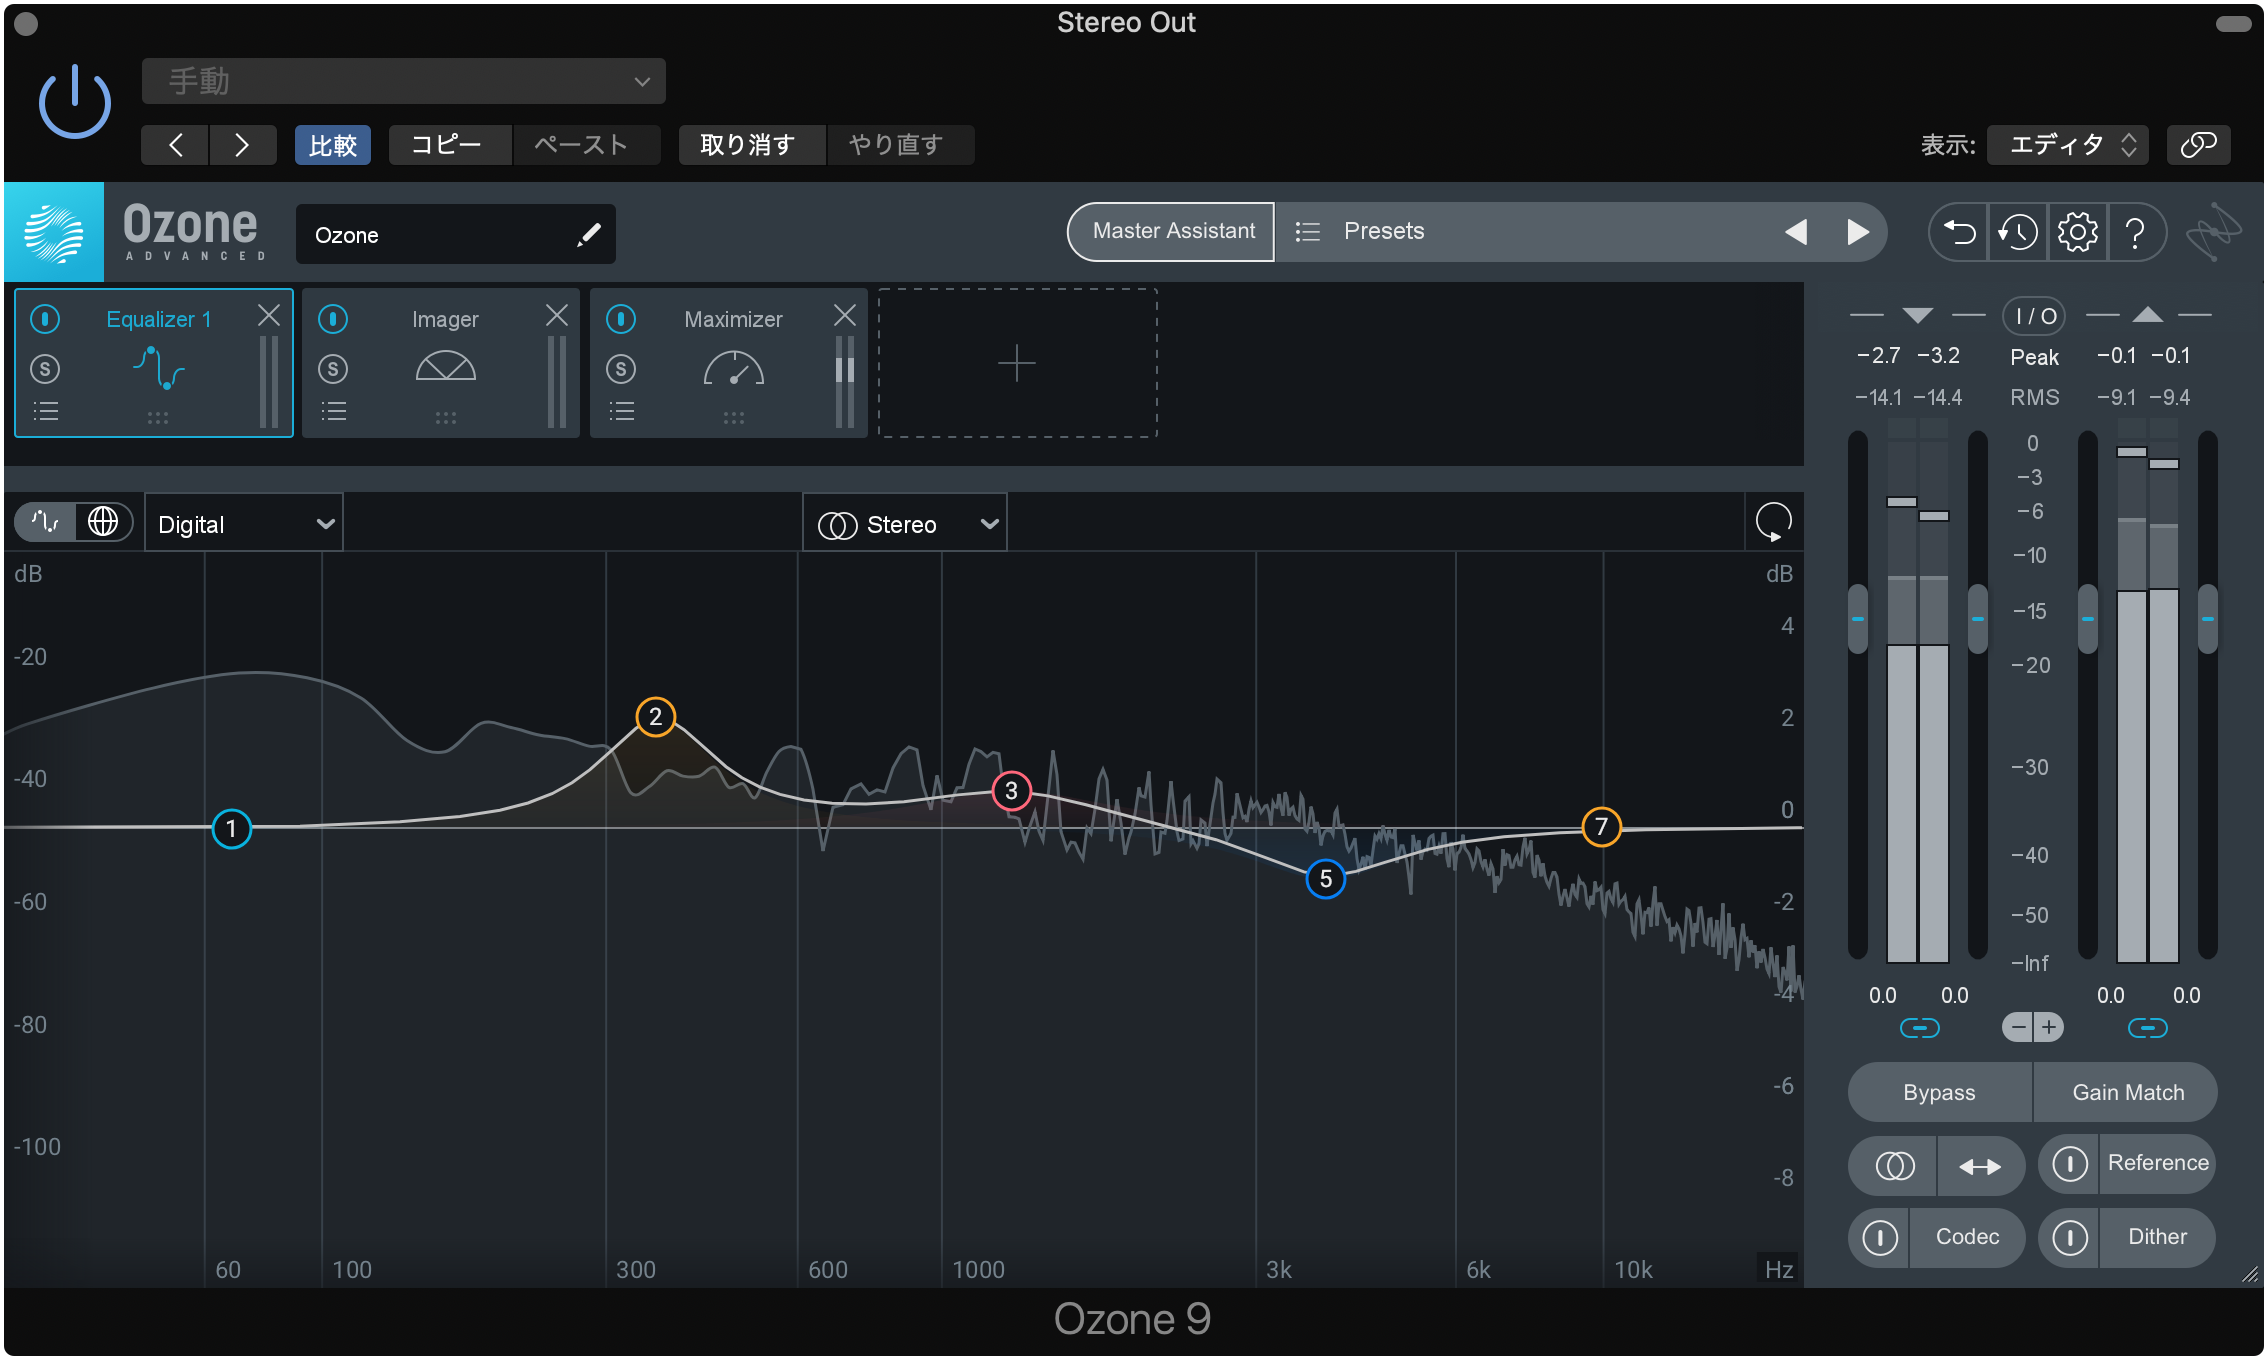 iZotope Tonal Balance Control 2.7.0 download the new version for apple